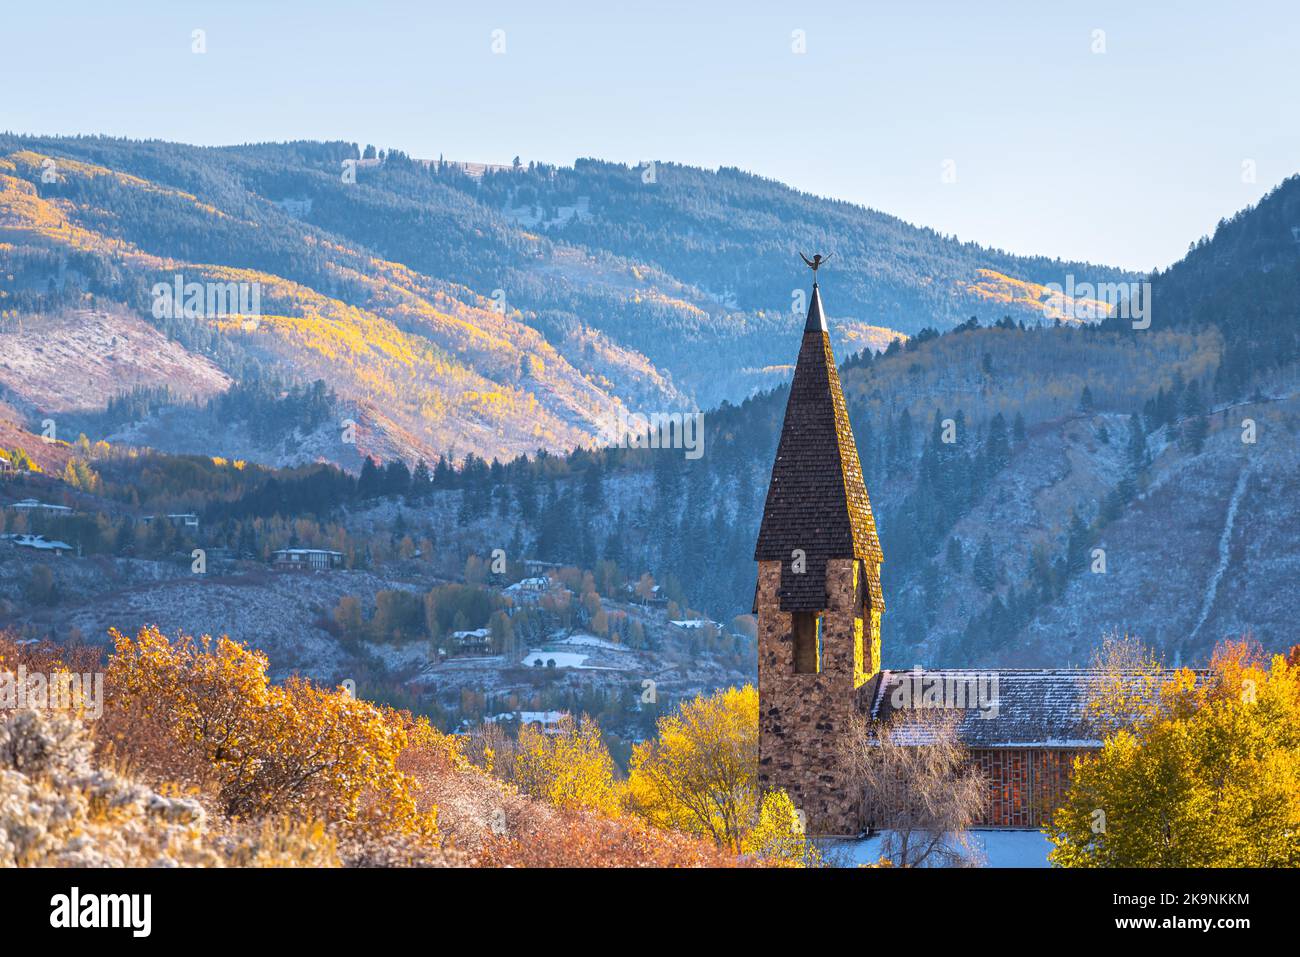 Aspen, Colorado ski resort town city chapel church bell tower building in autumn fall colorful foliage, early winter with snow in mountain valley Stock Photo